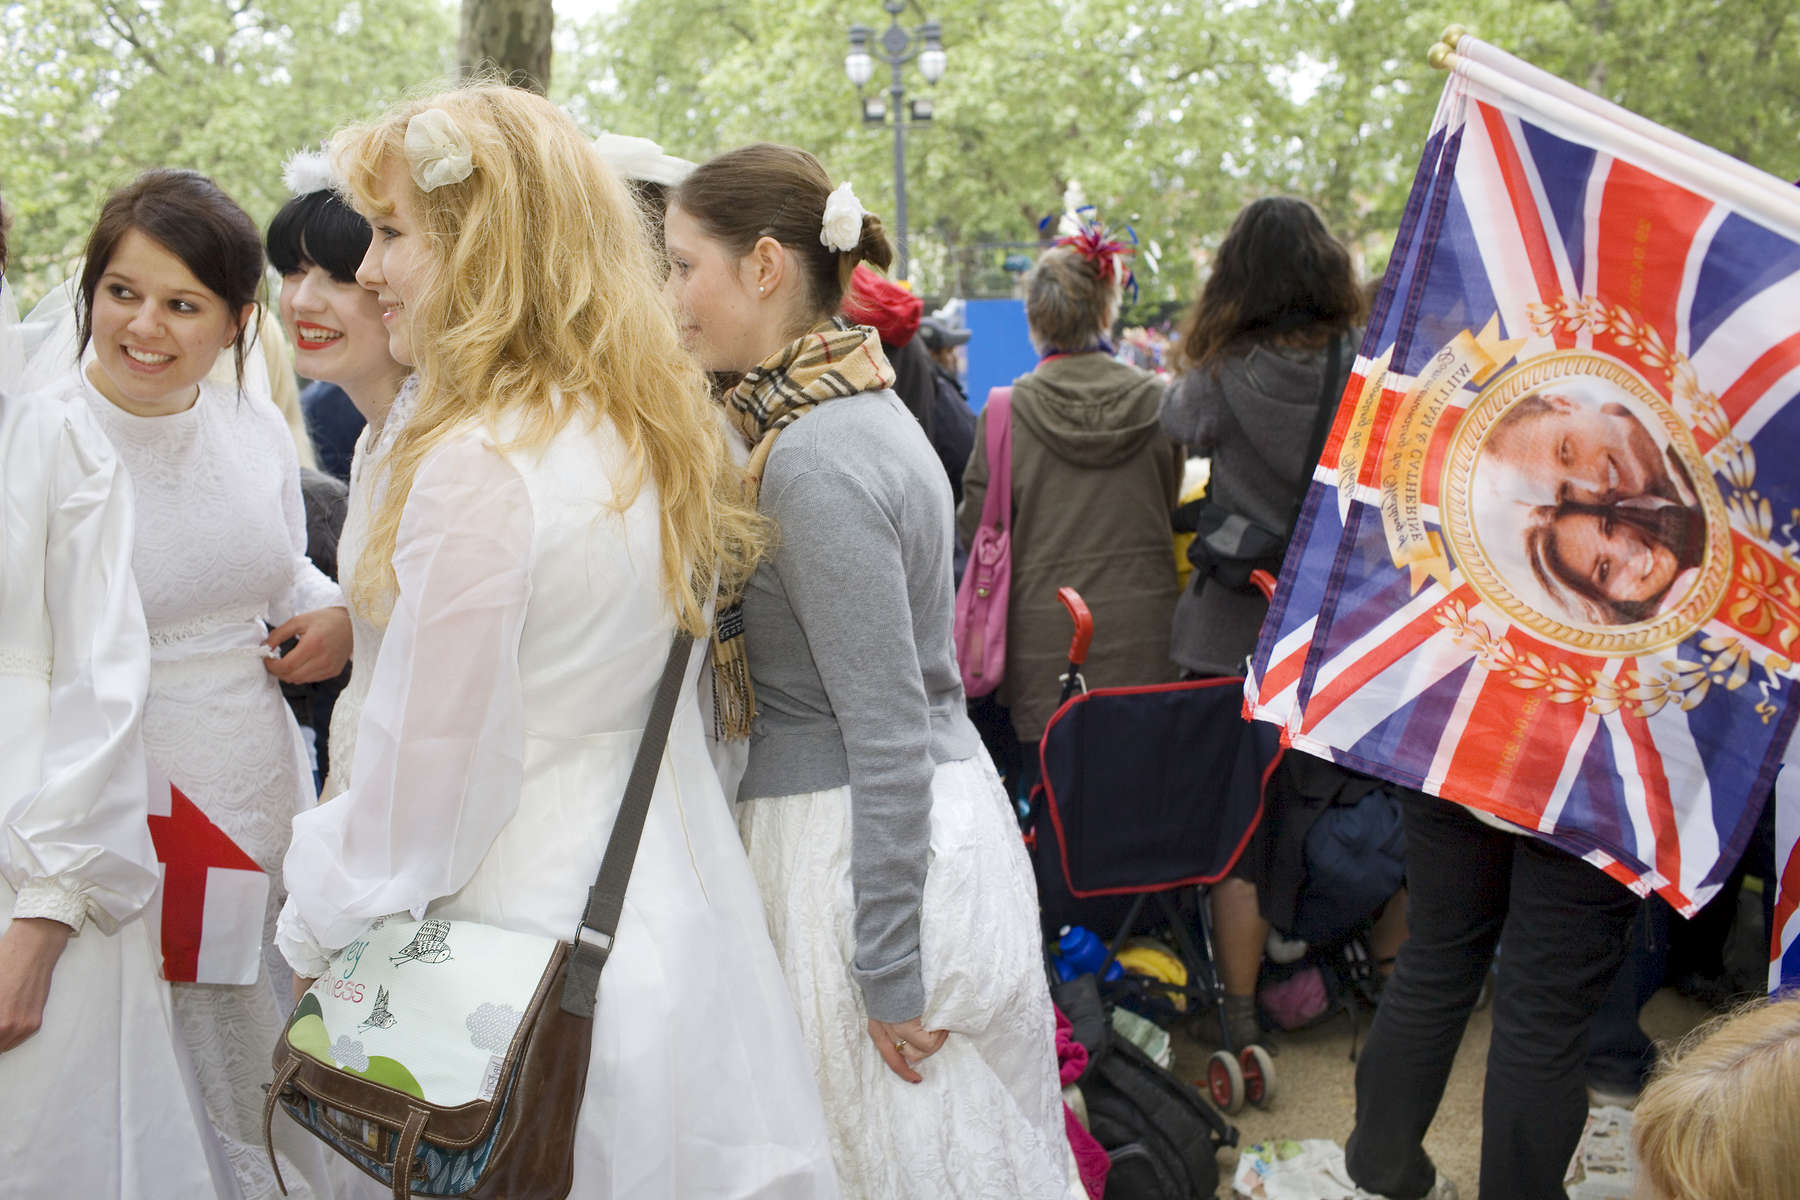 Women dressed as brides wait on the Mall in central London for the Royal Wedding between Prince William and Kate Middleton to begin.